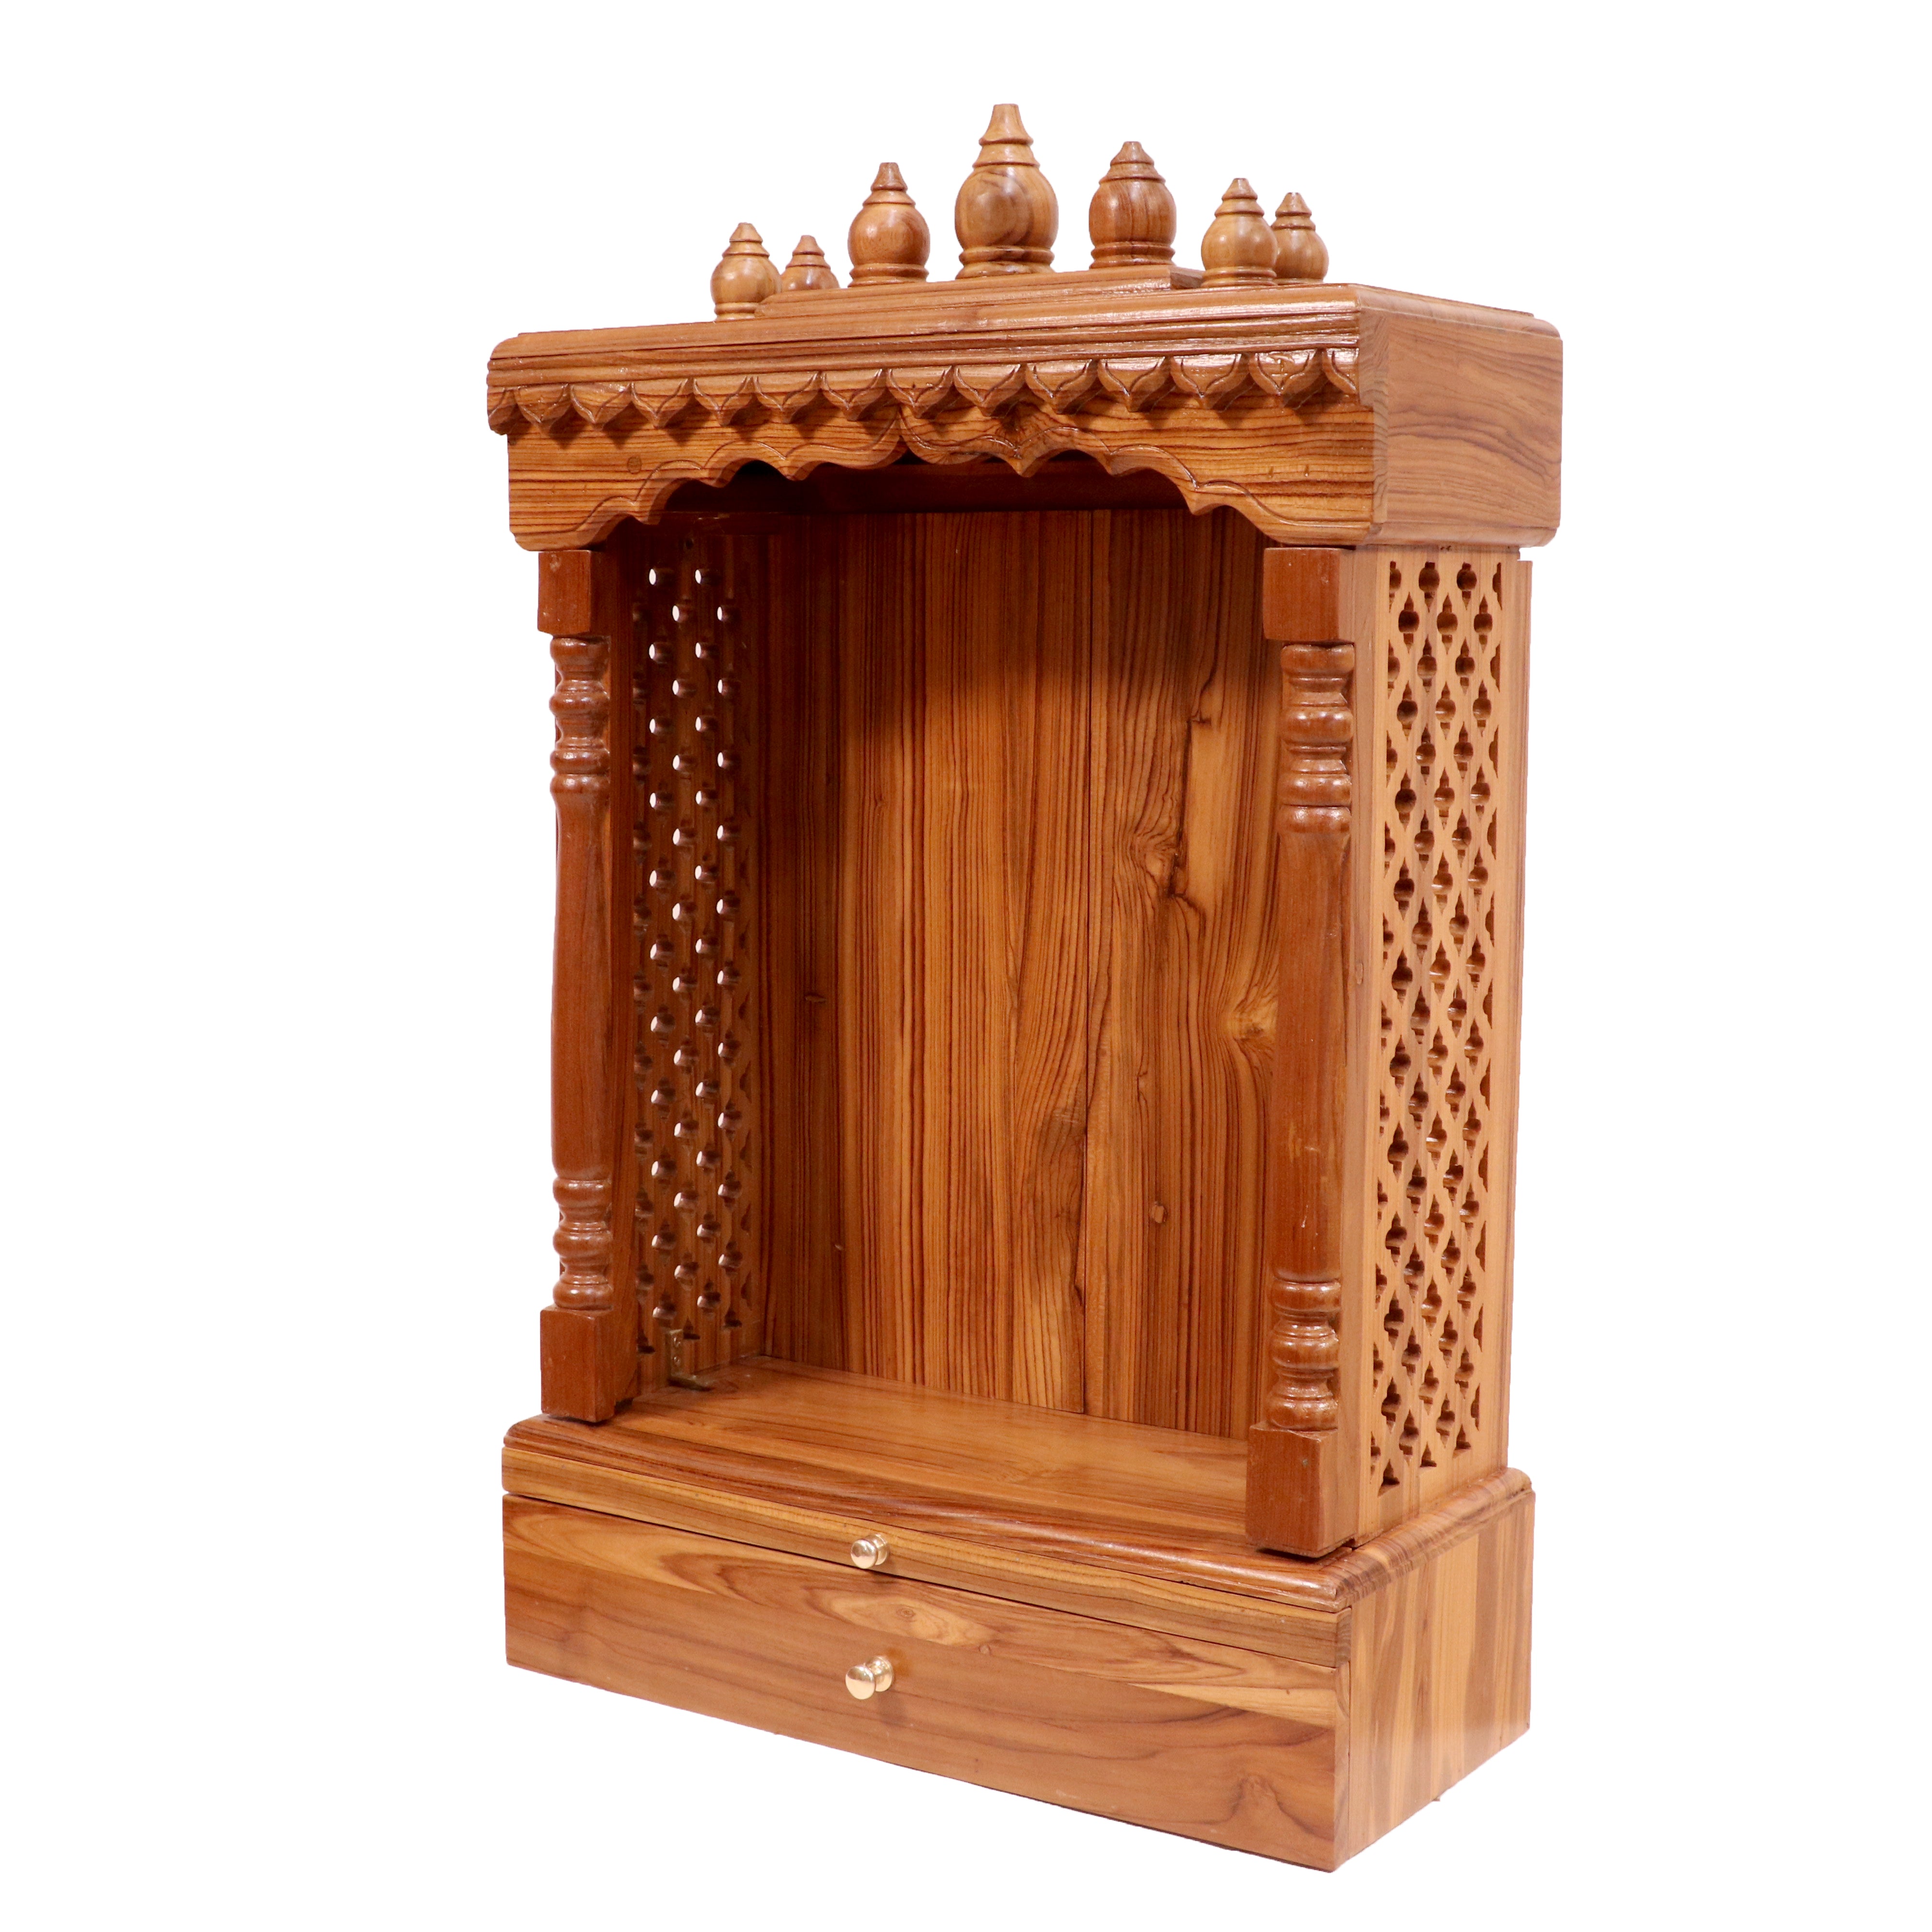 Vintage Tone Finish with Carved Jali Handmade Wooden Temple for Home Temple